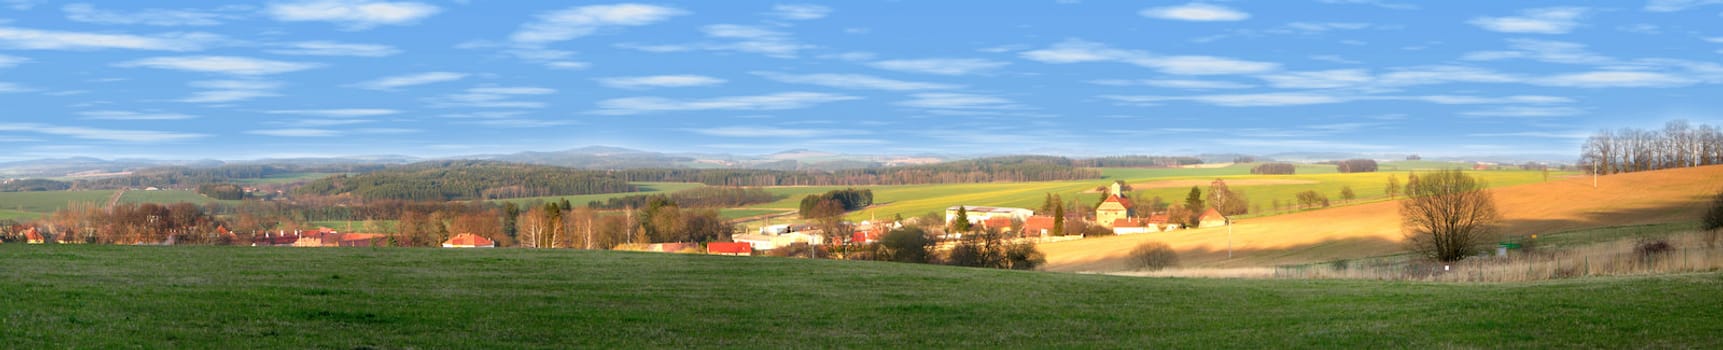 Landscape of a czech county - village with hiils, pastures and fields